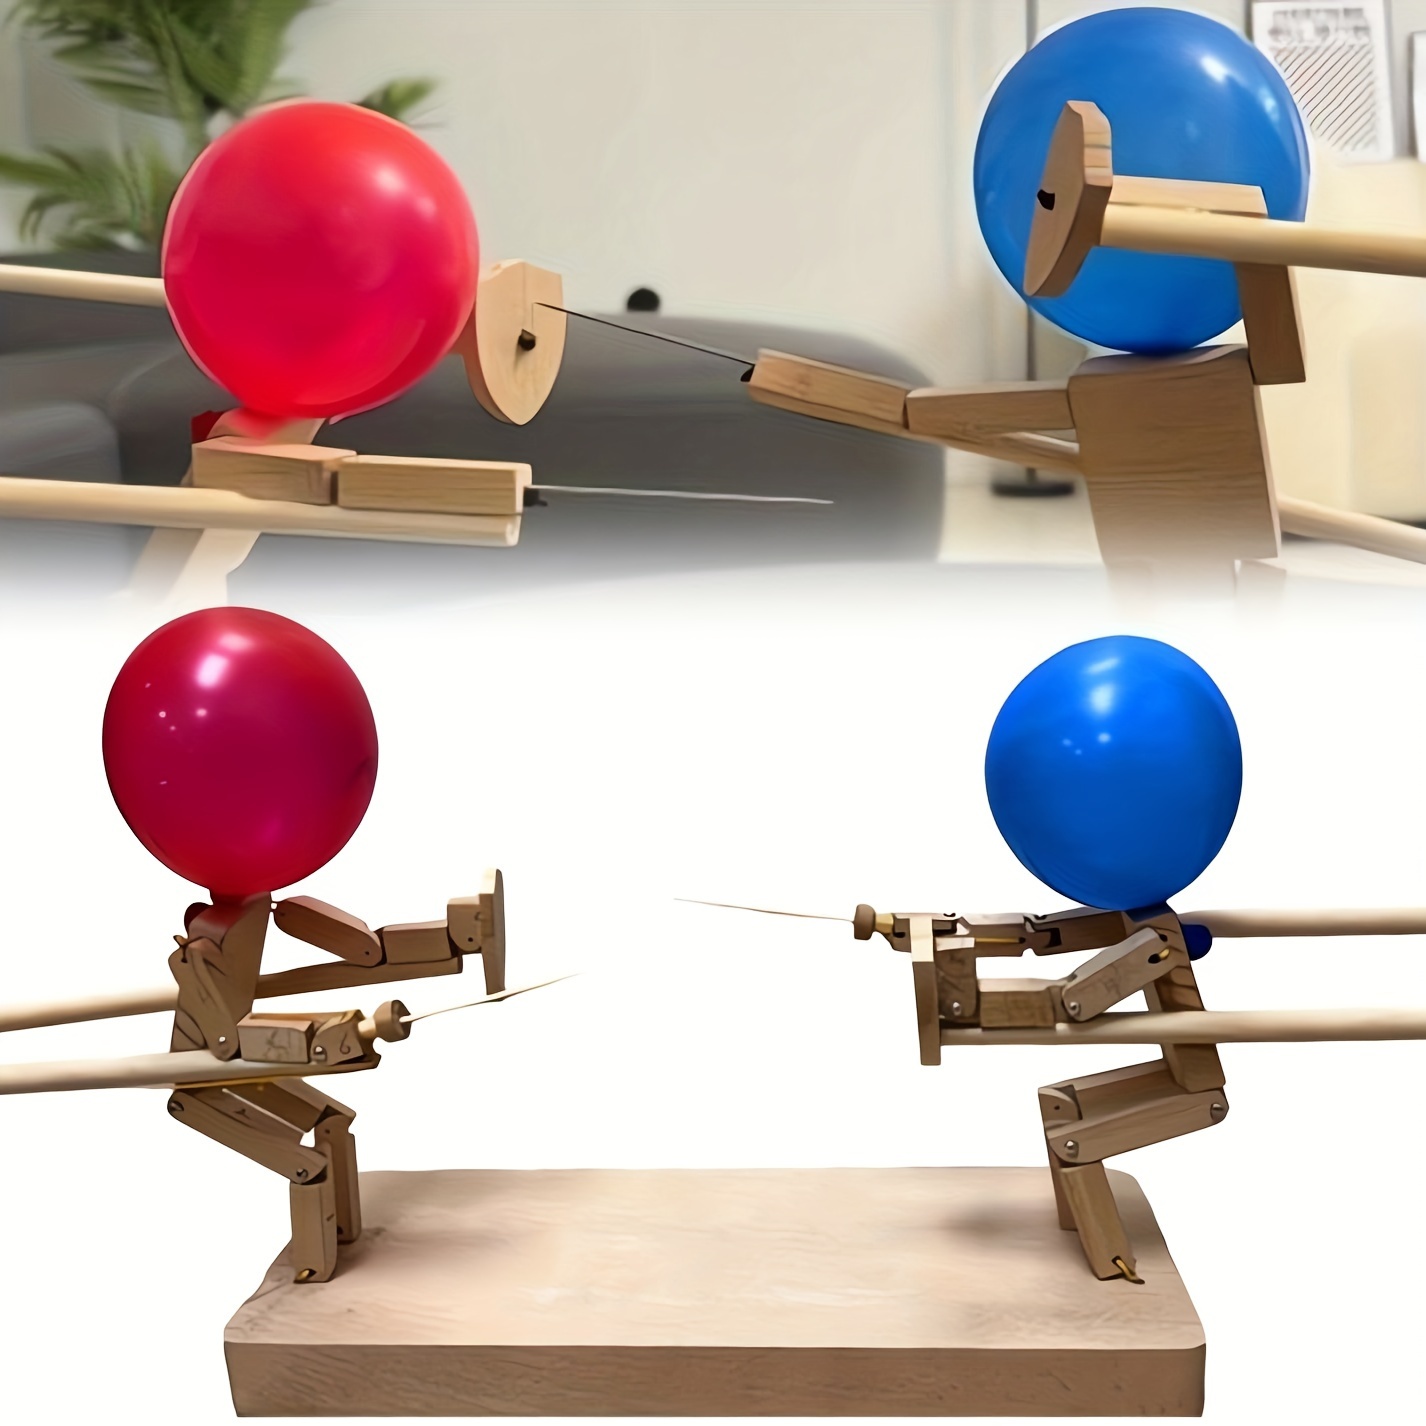 

Wooden Fencing Puppets, Wooden Bots Battle Game For 2 Players, Fast-paced Balloon Fight, Balloon Party Games - Fun And Exciting Game Toy